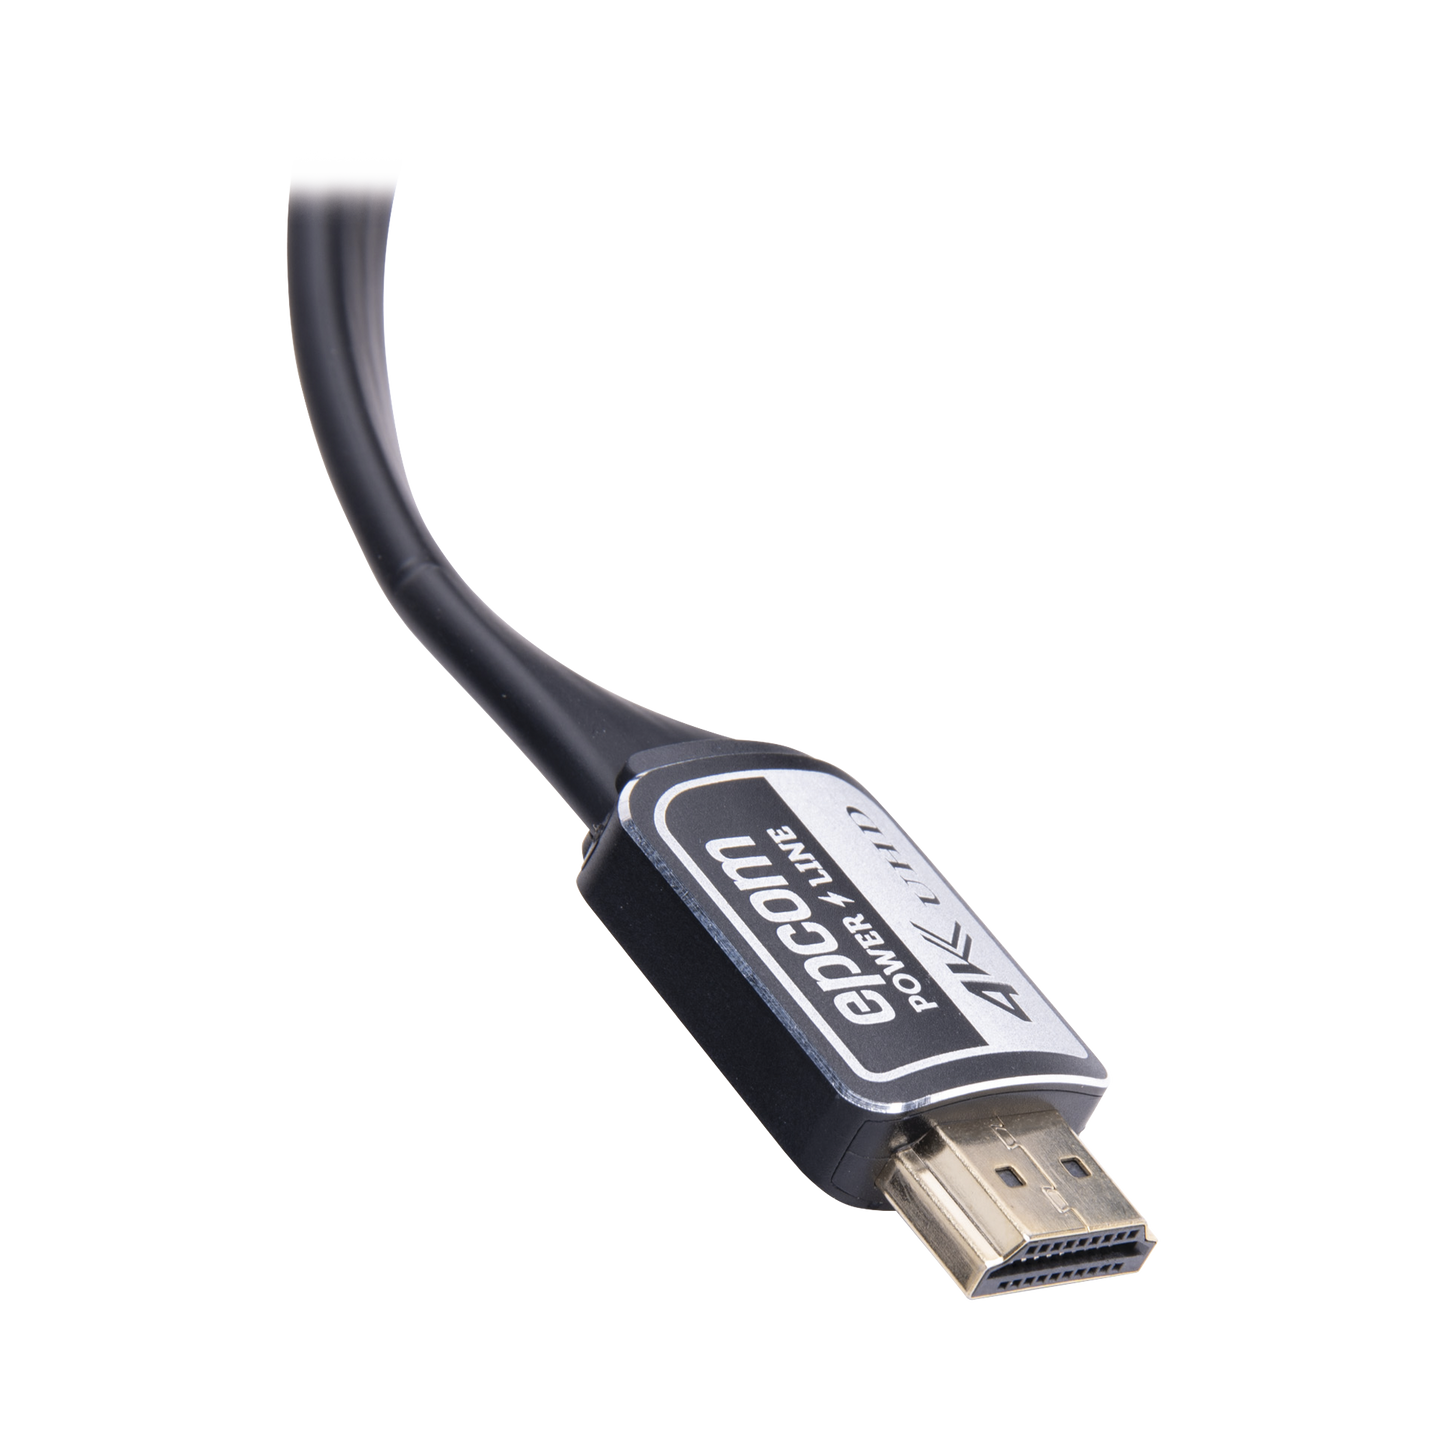 HDMI CABLE 2.0 version flat 10 MT ( 32.8 FT ) optimized for 4K ULTRA HD